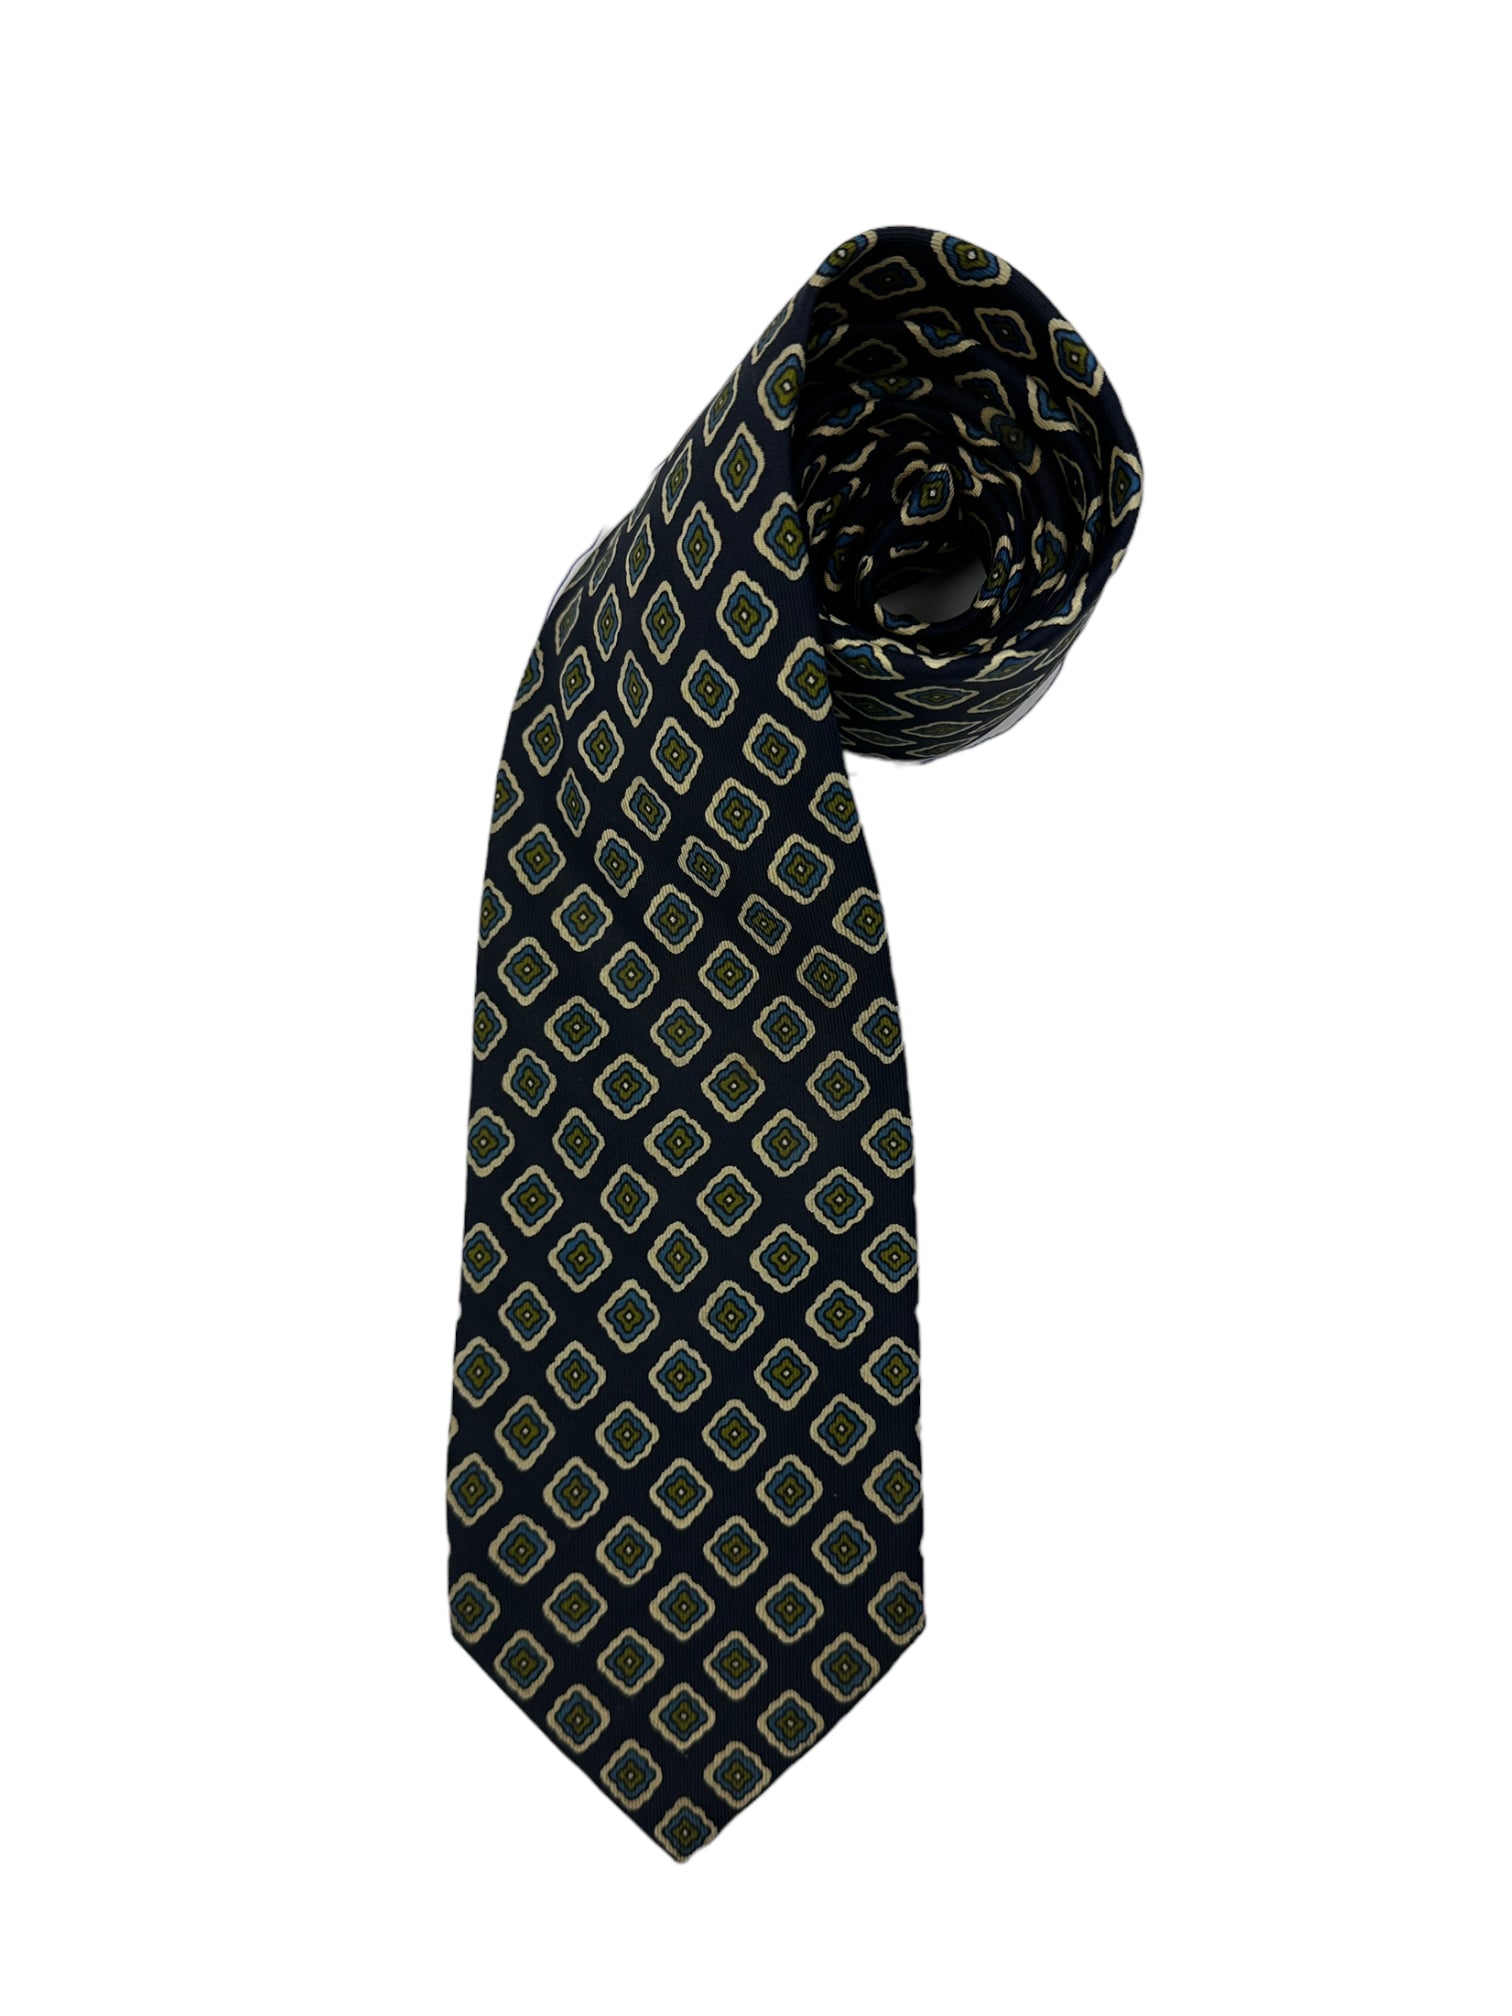 E.Marinella Blue and Green Floral Tie